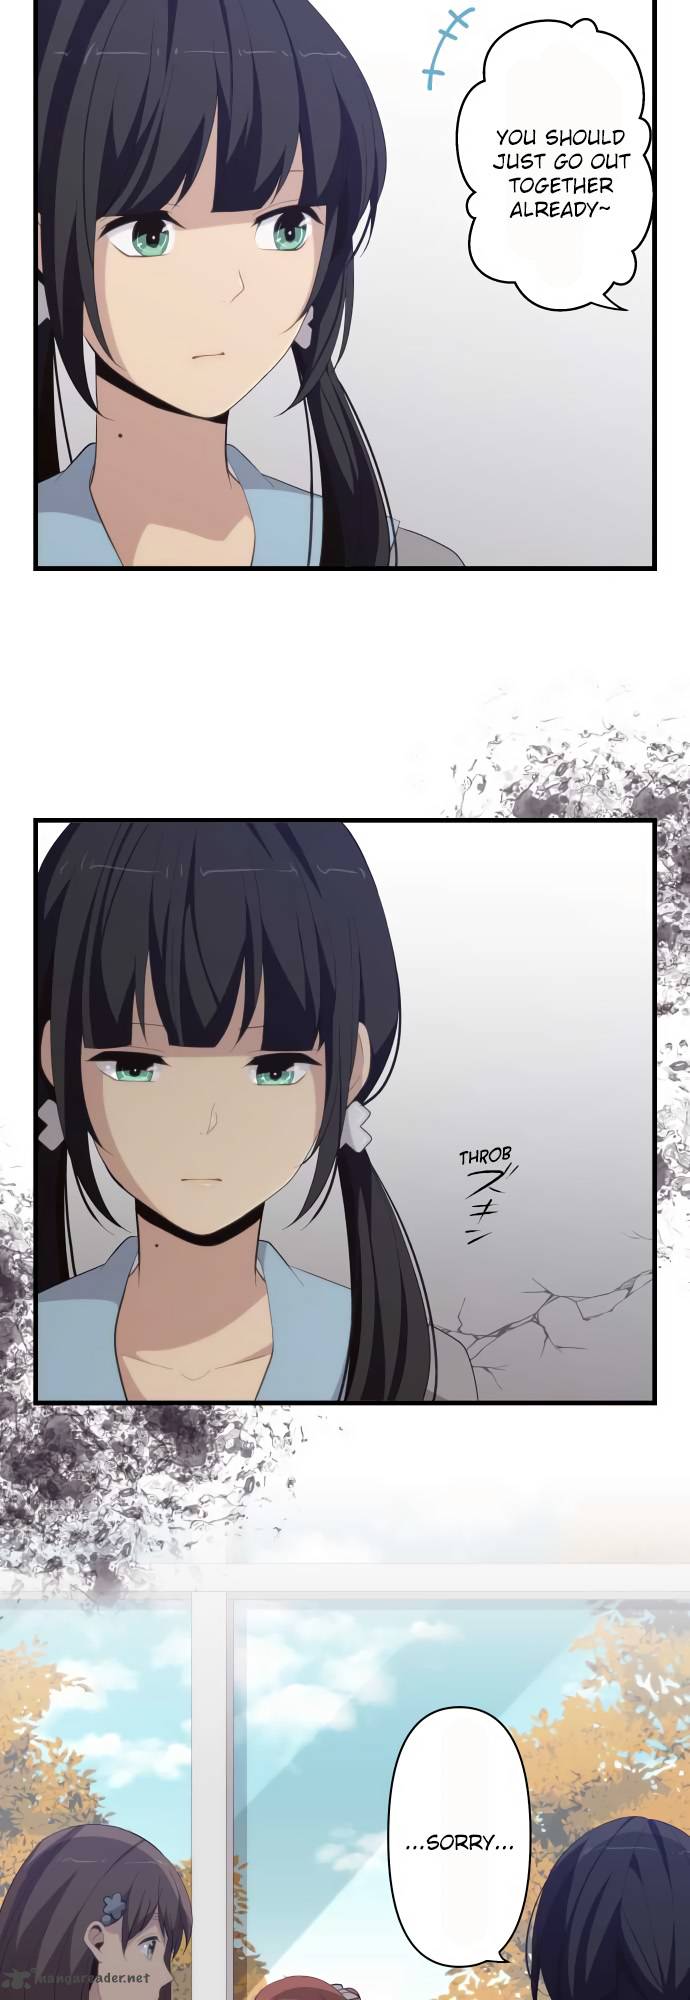 Relife 182 9